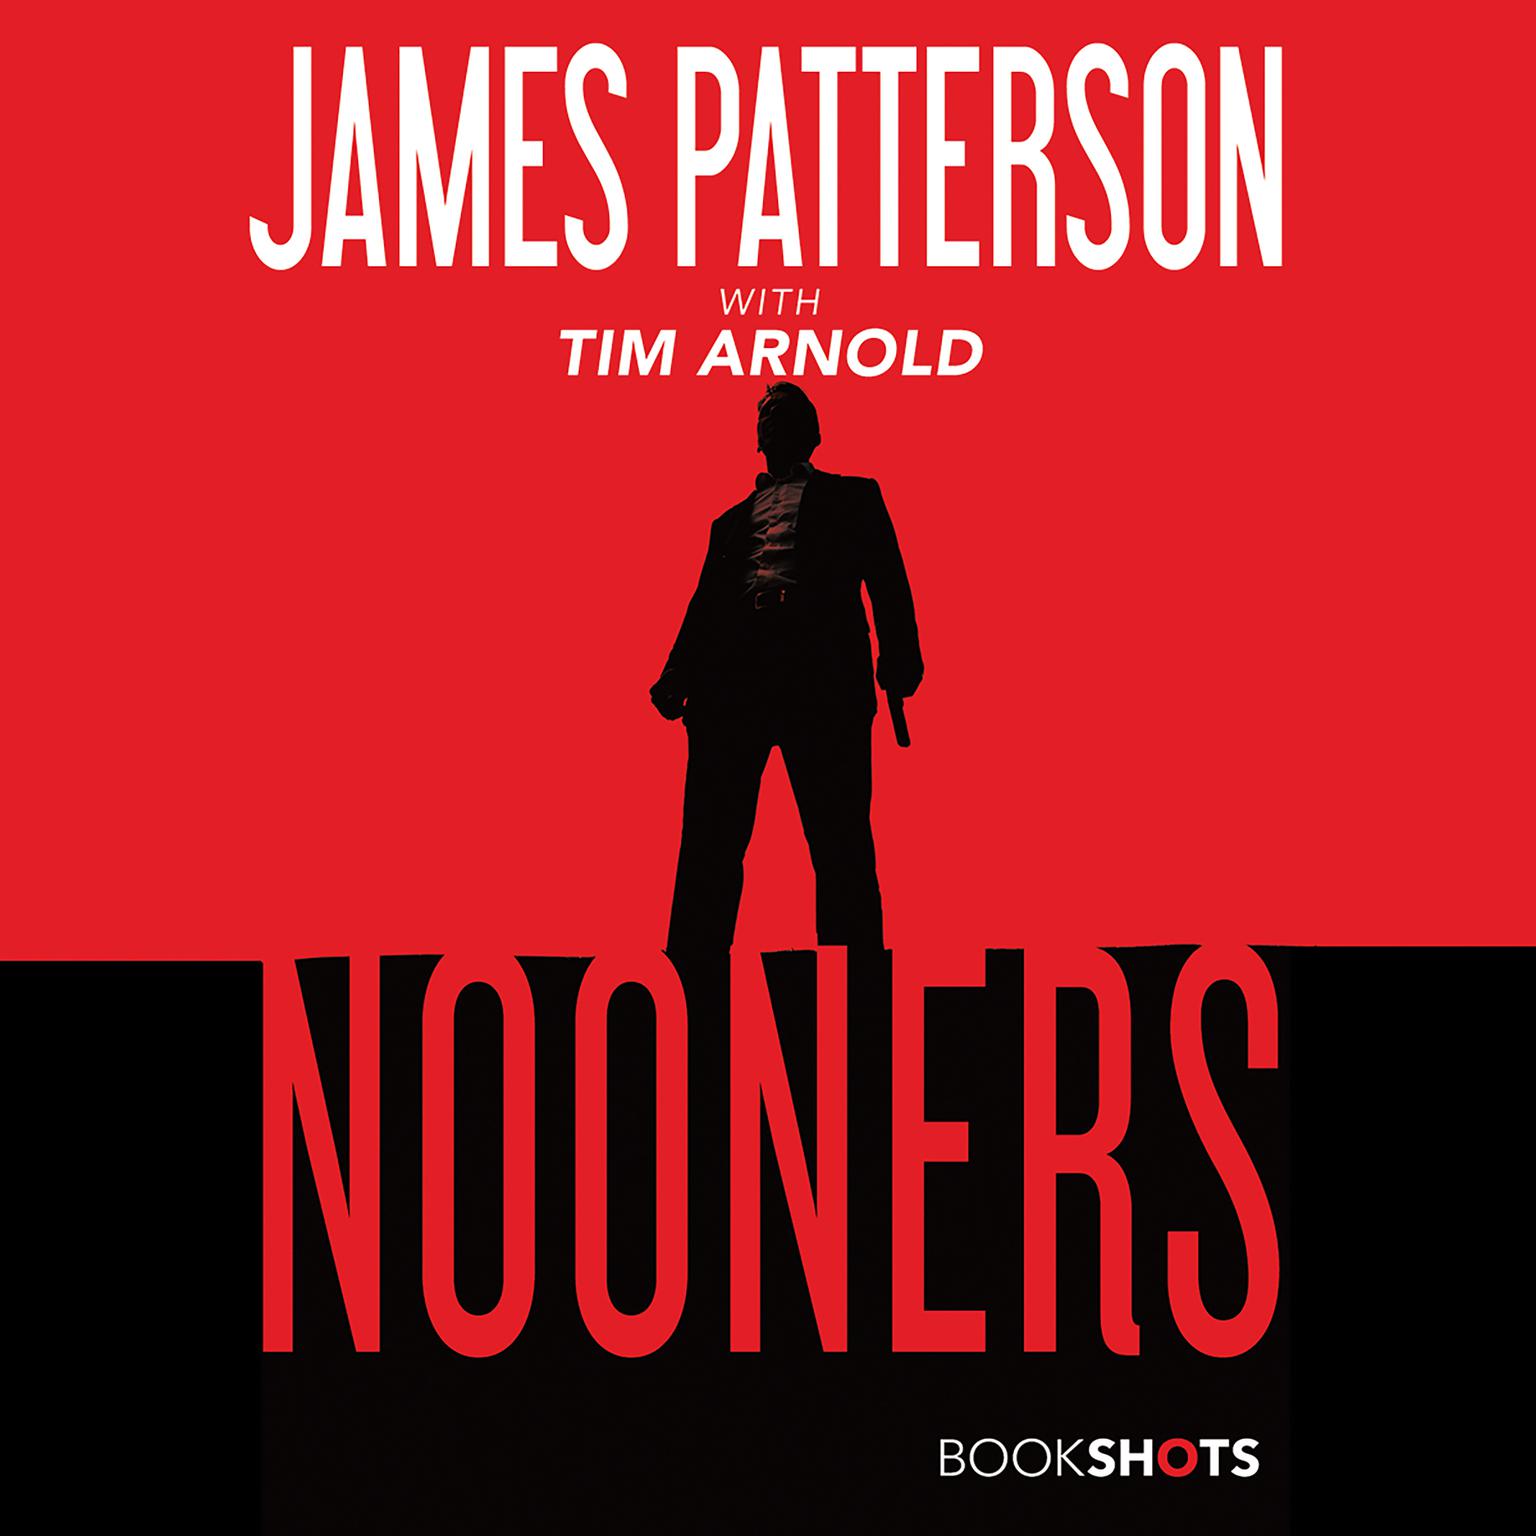 Nooners Audiobook, by James Patterson